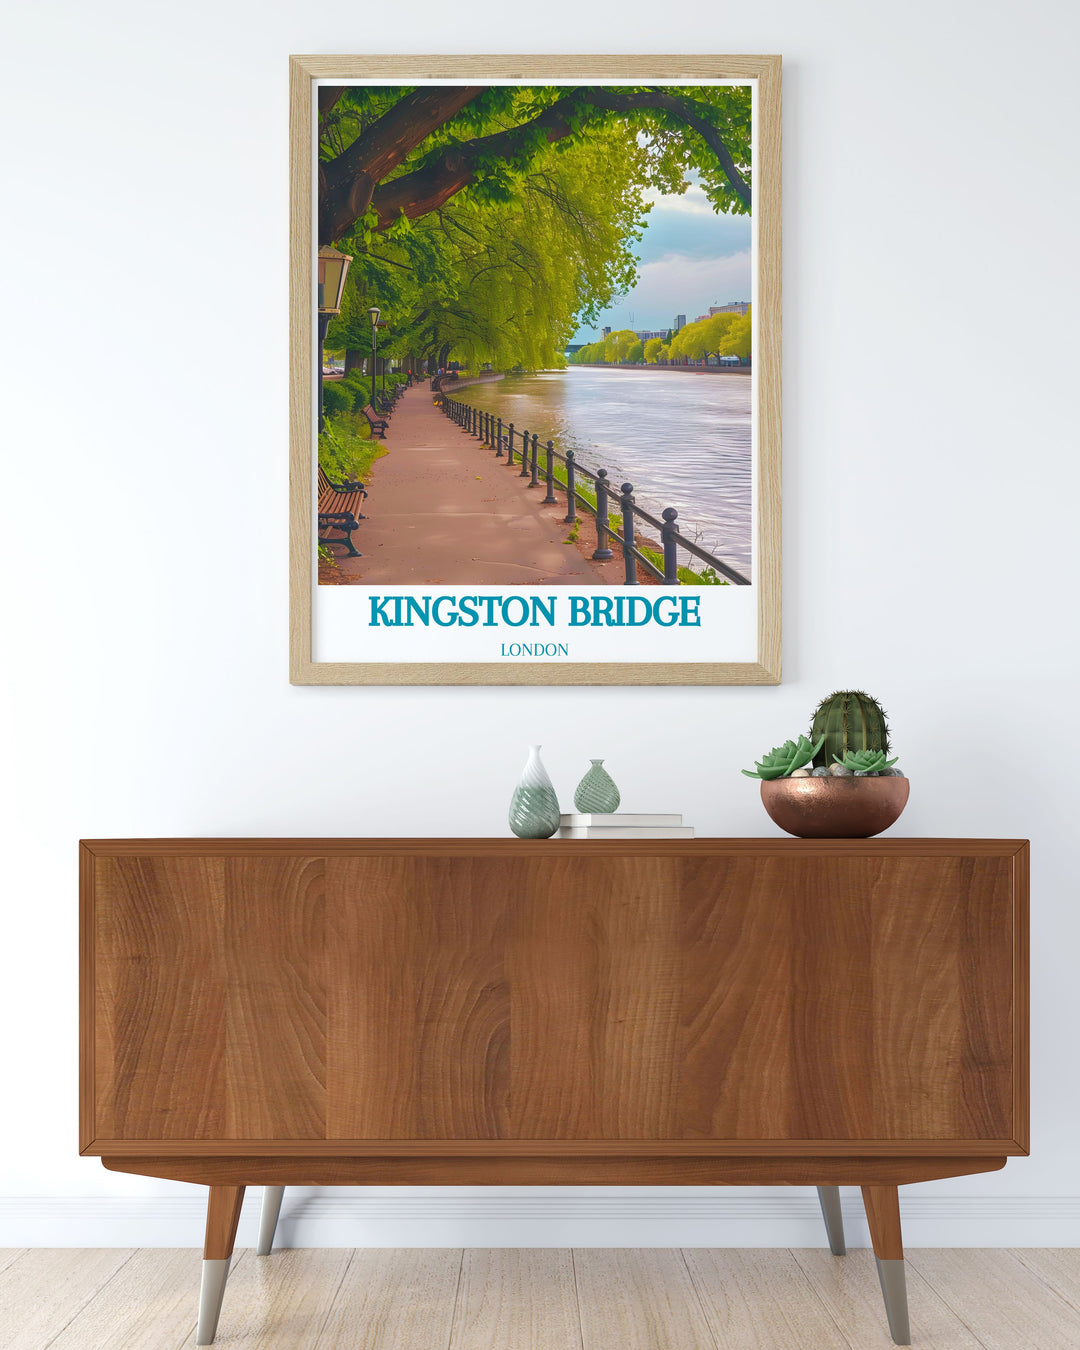 The travel poster of Kingston Bridge brings the historical depth and picturesque environment of this iconic structure into your home, emphasizing its architectural beauty.